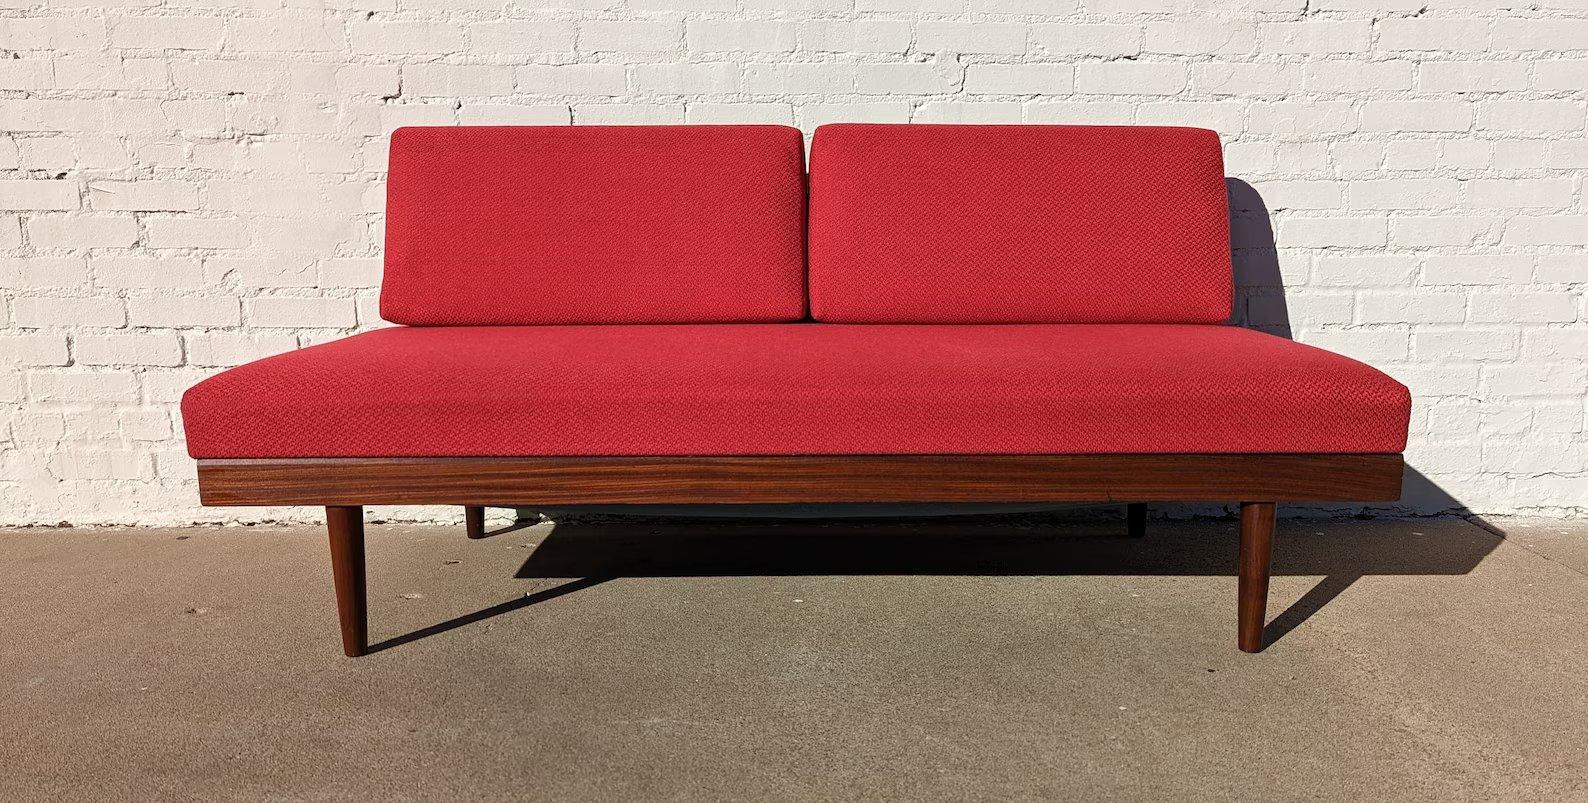 Mid Century Scandinavian Red Sleeper Sectional

Above average vintage condition and structurally sound. Has some expected slight finish wear and scratching on teak frame. Upholstery is new. Has a couple edge chips in teak frame. Both sofas pull up